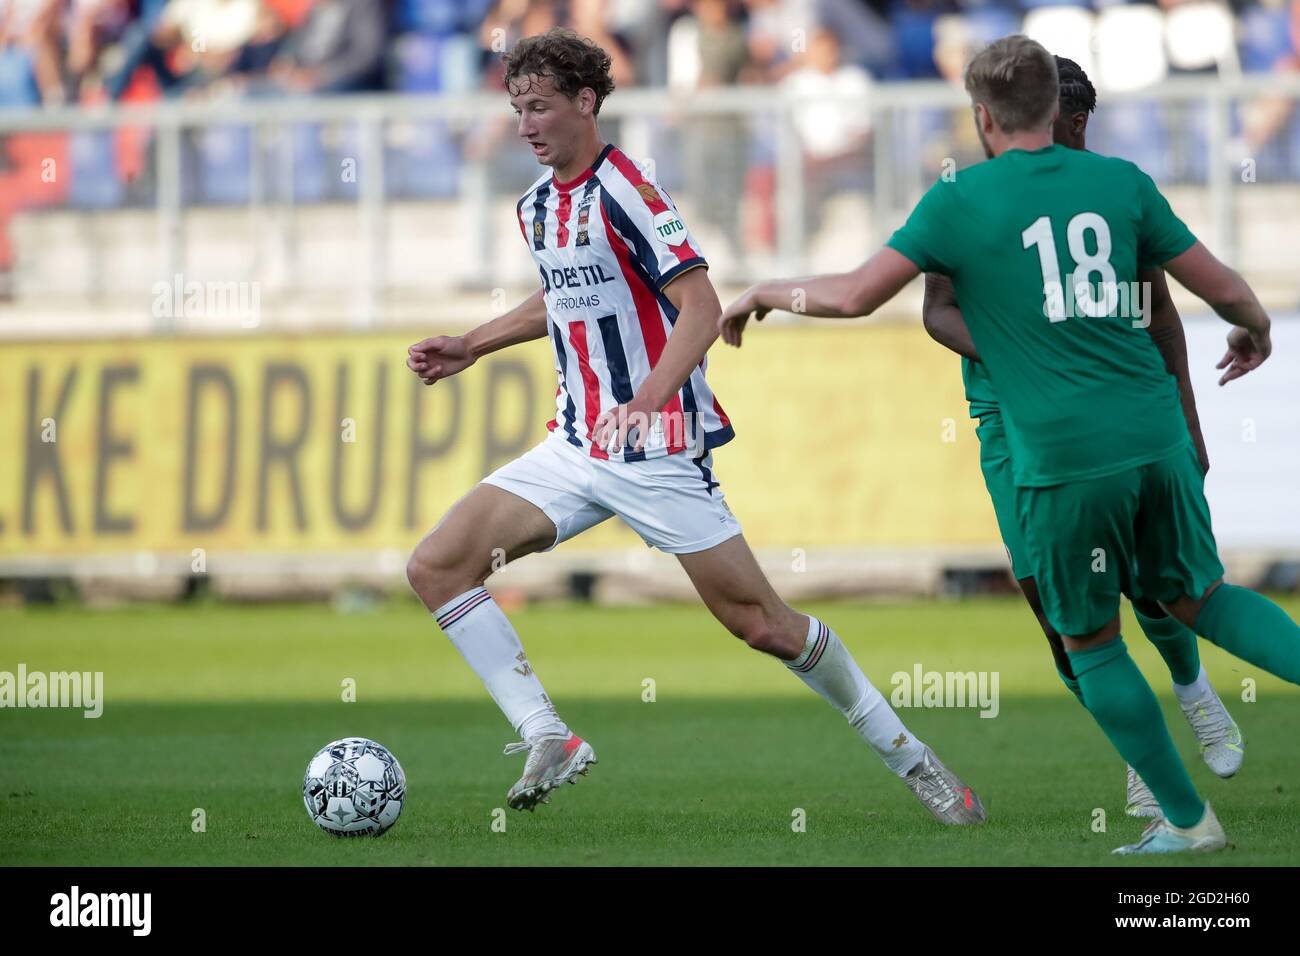 TILBURG, NETHERLANDS - AUGUST 10: Wesley Spieringhs of Willem II during the Pre-season Friendly match between Willem II and Royal Excelsior Virton at the Koning Willem II Stadion on August 10, 2021 in Tilburg, Netherlands (Photo by Broer van den Boom/Orange Pictures) Stock Photo